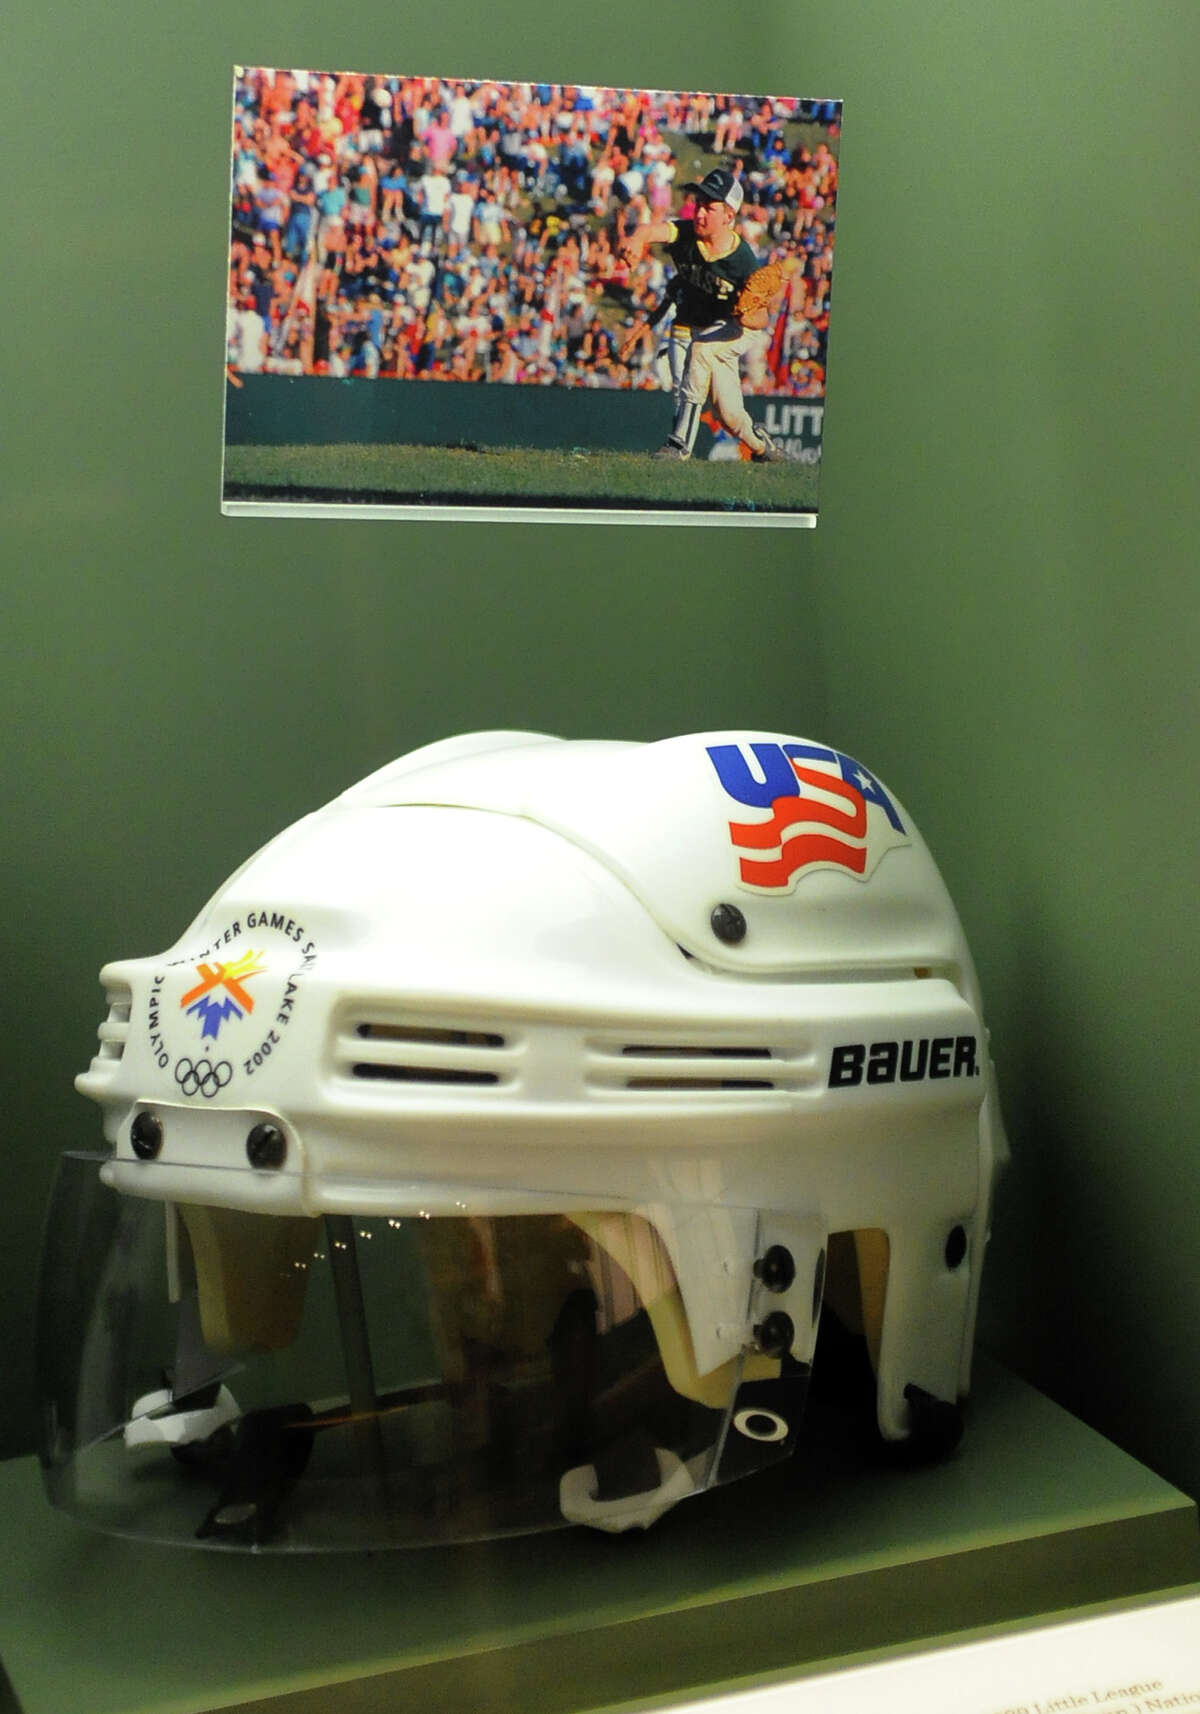 Chris Drury's spot featuring his NHL helmet as part of the Hall of Excellence in the Little League World Series Museum in Williamsport, Pa. on Thursday August 22, 2013. Drury was a pitcher with Trumbull that won the series in 1989.